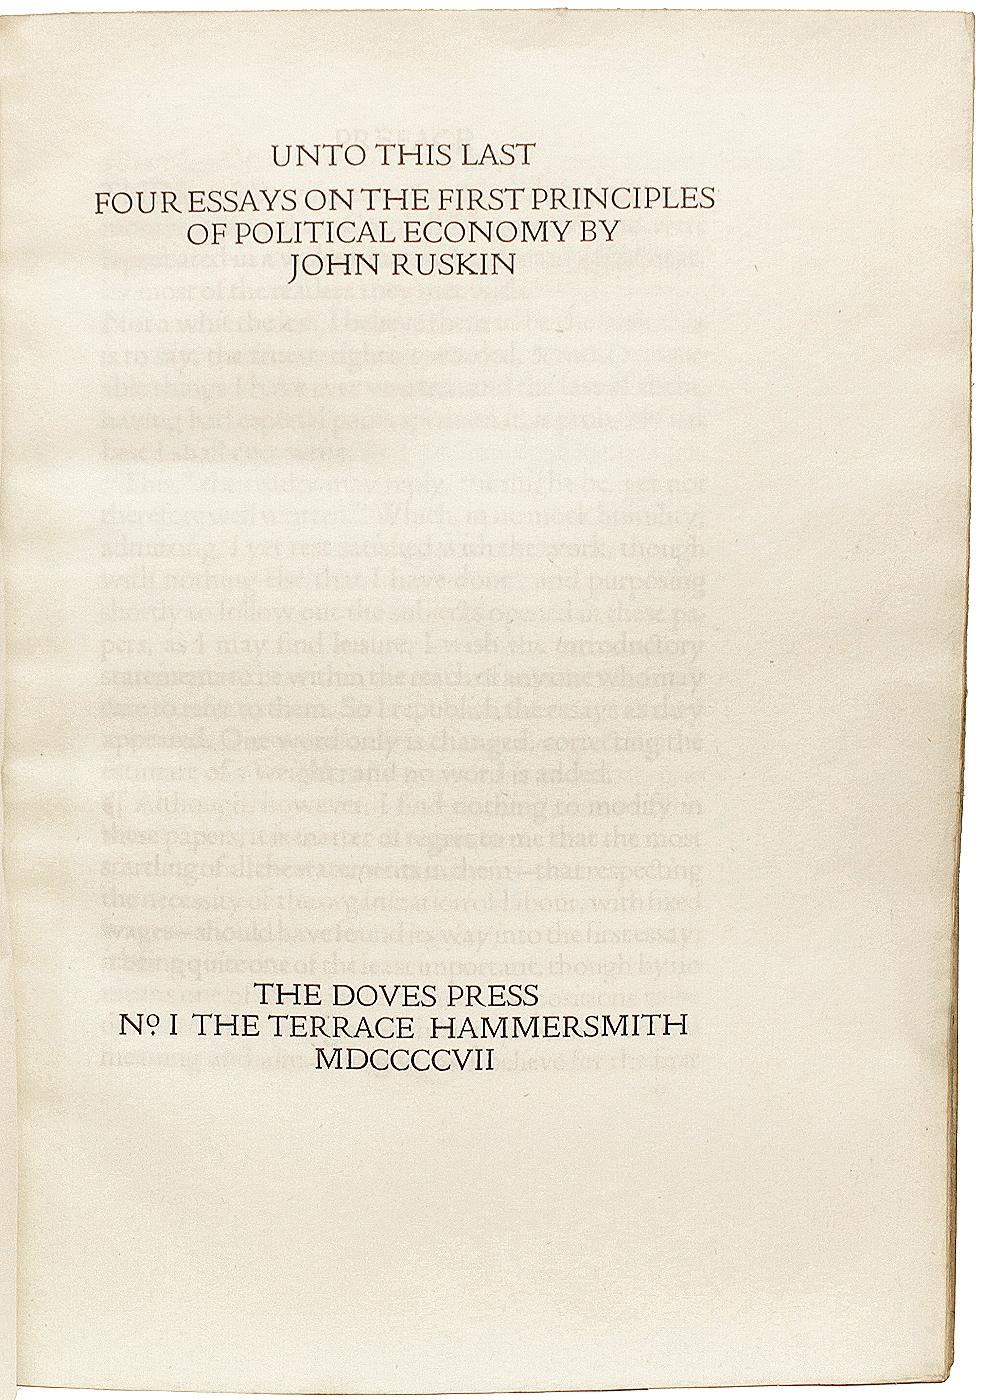 AUTHOR: RUSKIN, John. 

TITLE: Unto This Last. Four essays on the first principles of political economy.

PUBLISHER: Hammersmith: The Doves Press, 1907.

DESCRIPTION: JOHN DRINKWATER'S COPY. 1 vol., 9-1/4